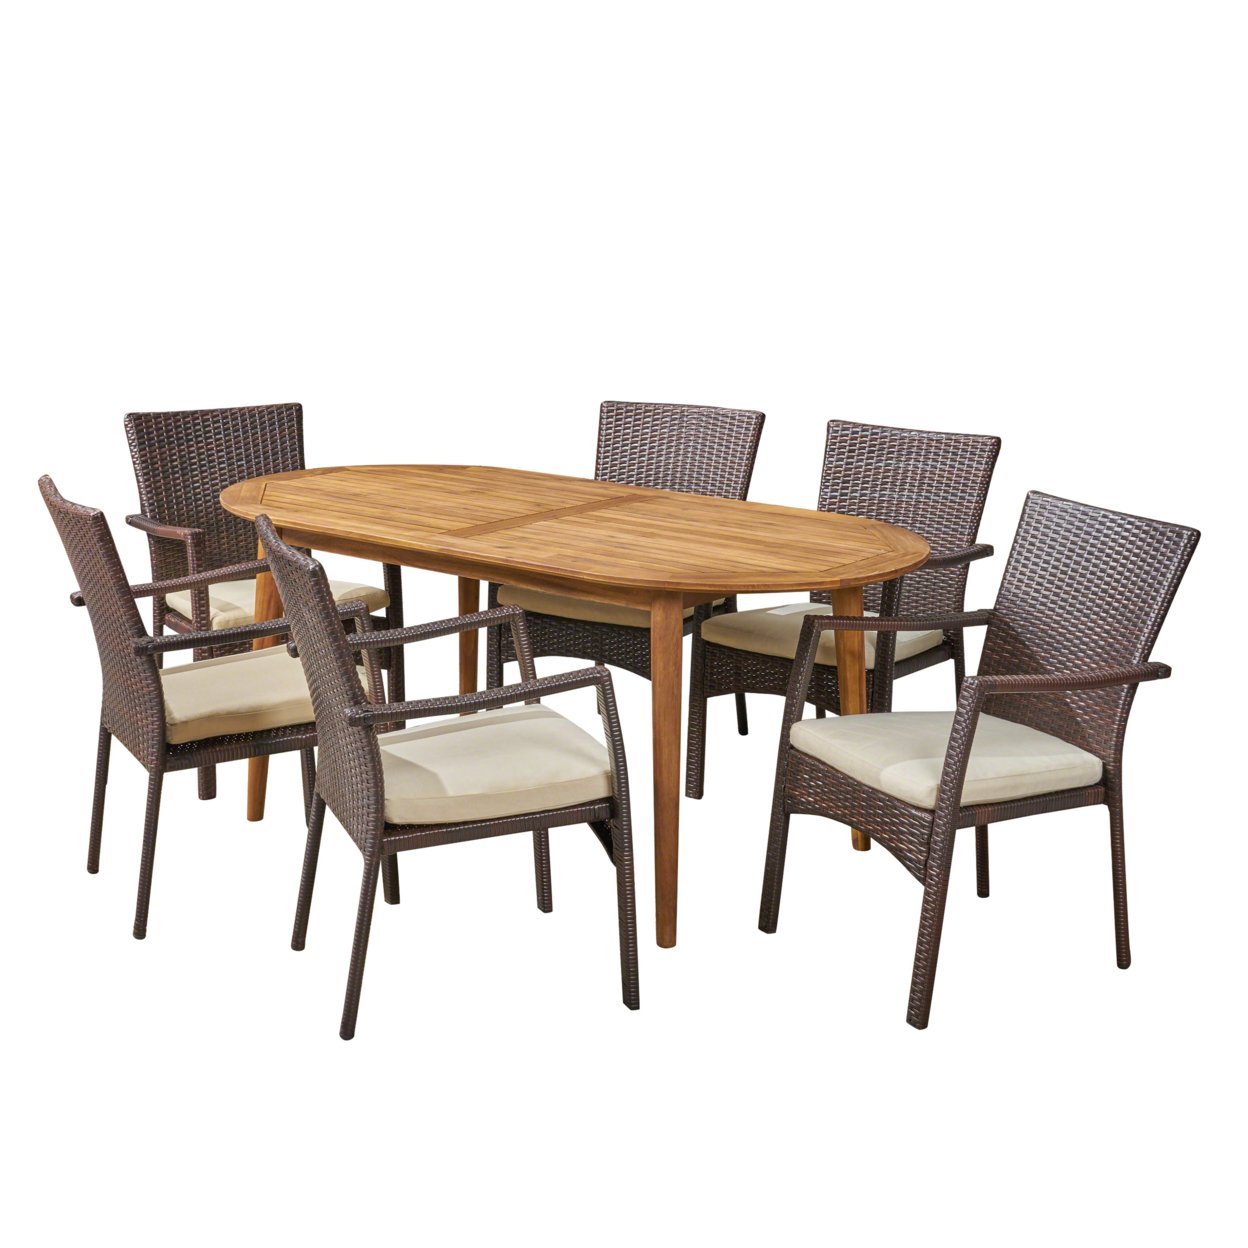 Stanford Outdoor 7-Piece Acacia Wood Dining Set With Wicker Chairs - Teak Finish + Brown + Cream